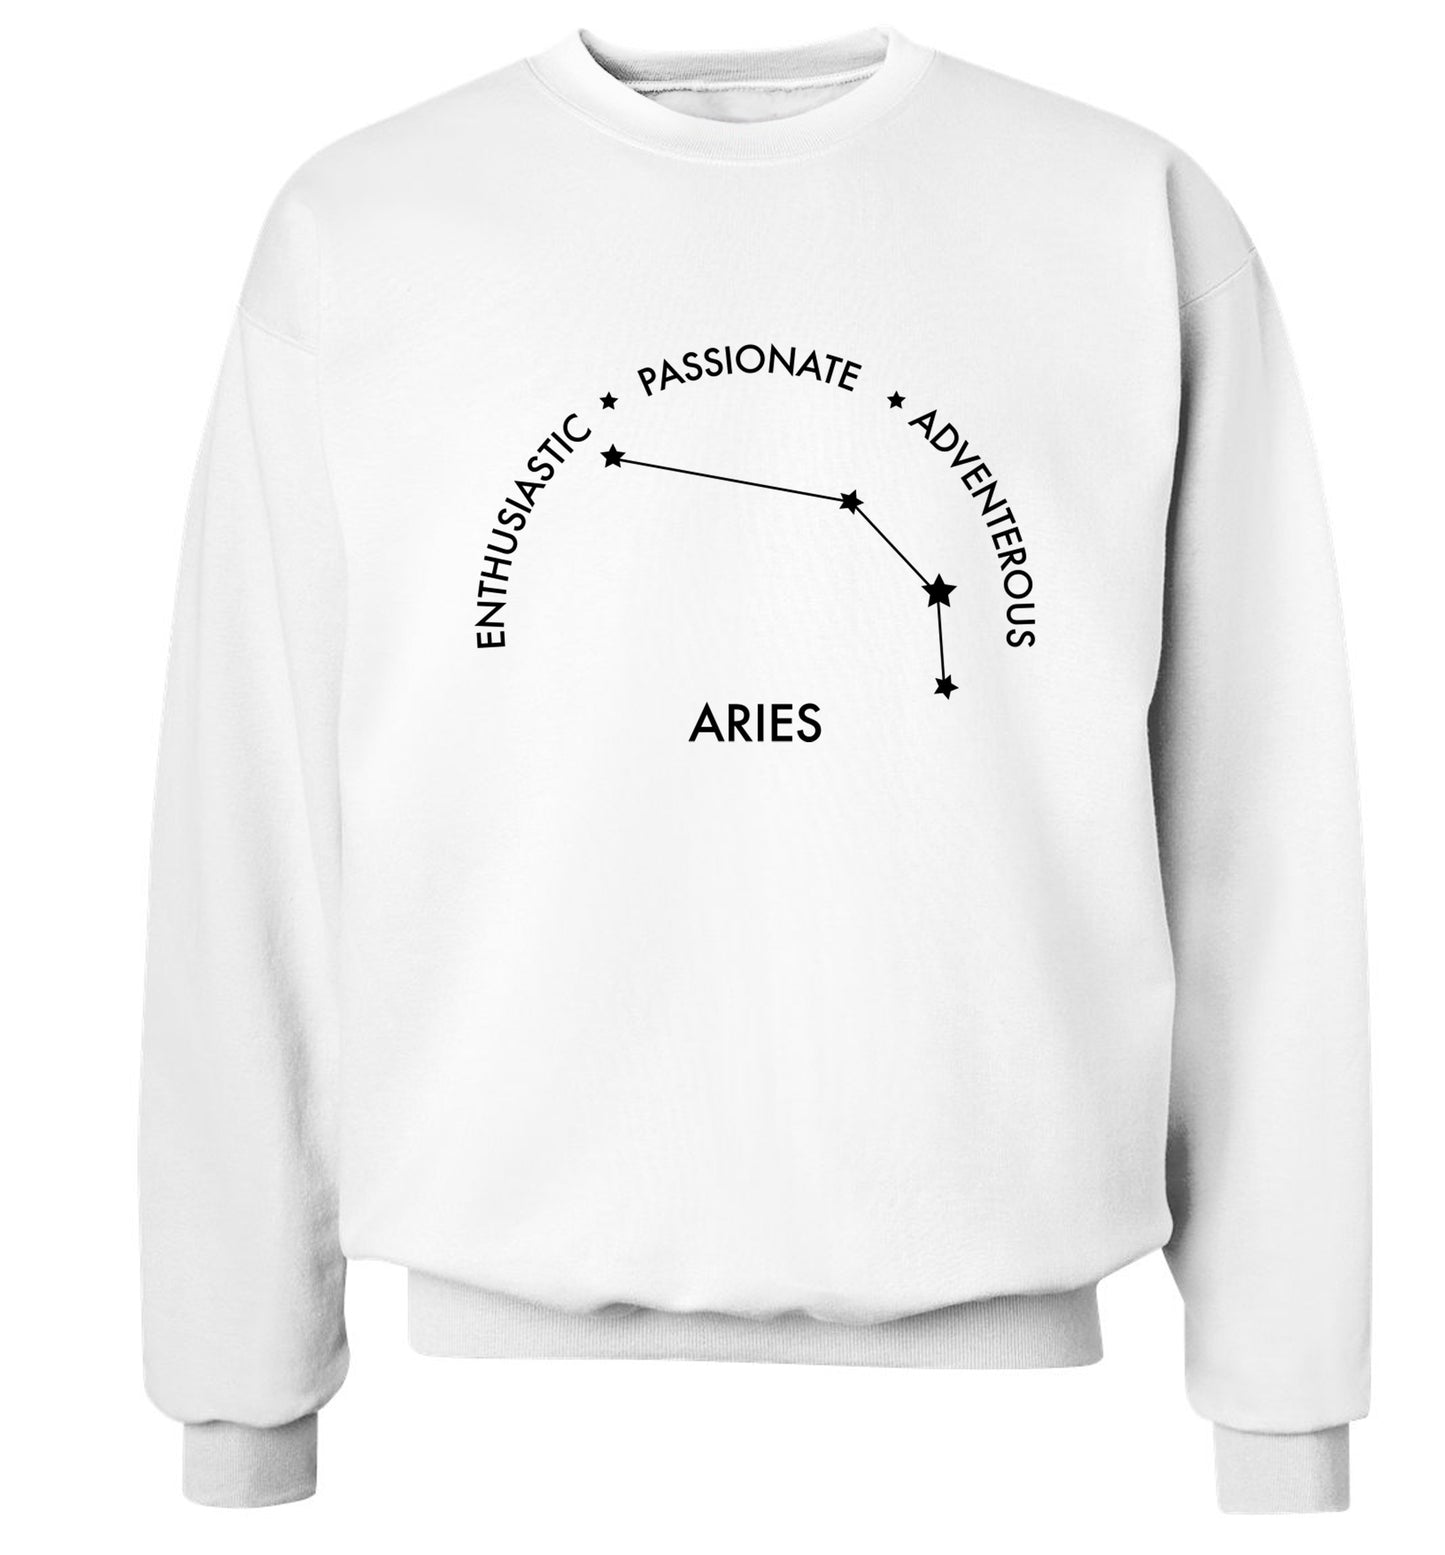 Aries enthusiastic | passionate | adventerous Adult's unisex white Sweater 2XL